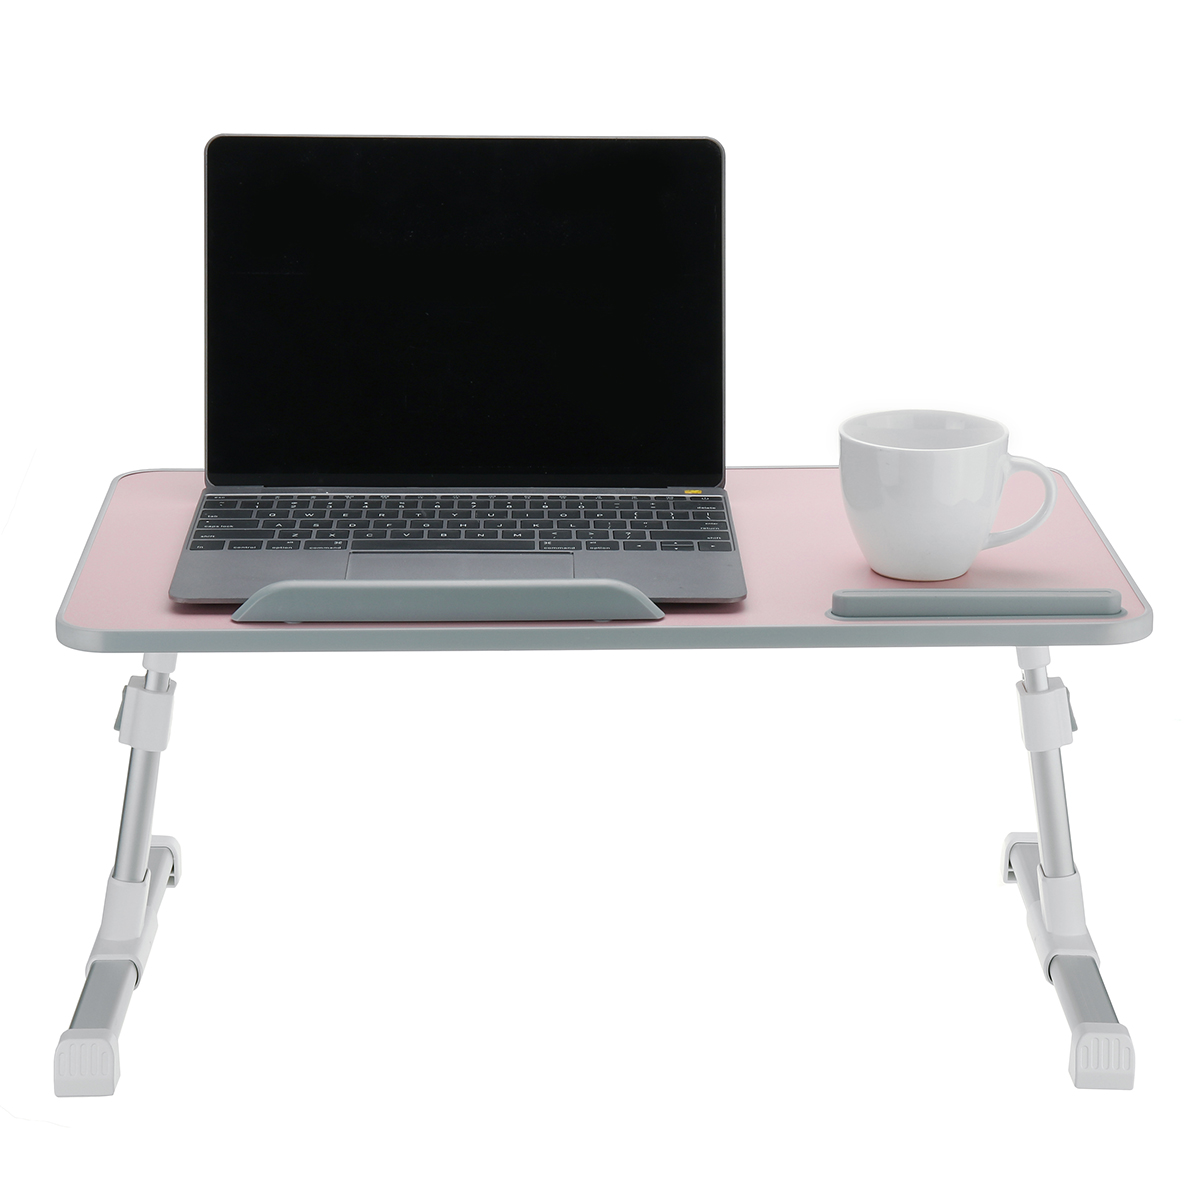 Folding-Laptop-Bed-Table-Dorm-Desk-Couch-Table-with-Cooling-Fan-Breakfast-Tray-Notebook-Stand-Readin-1796247-12